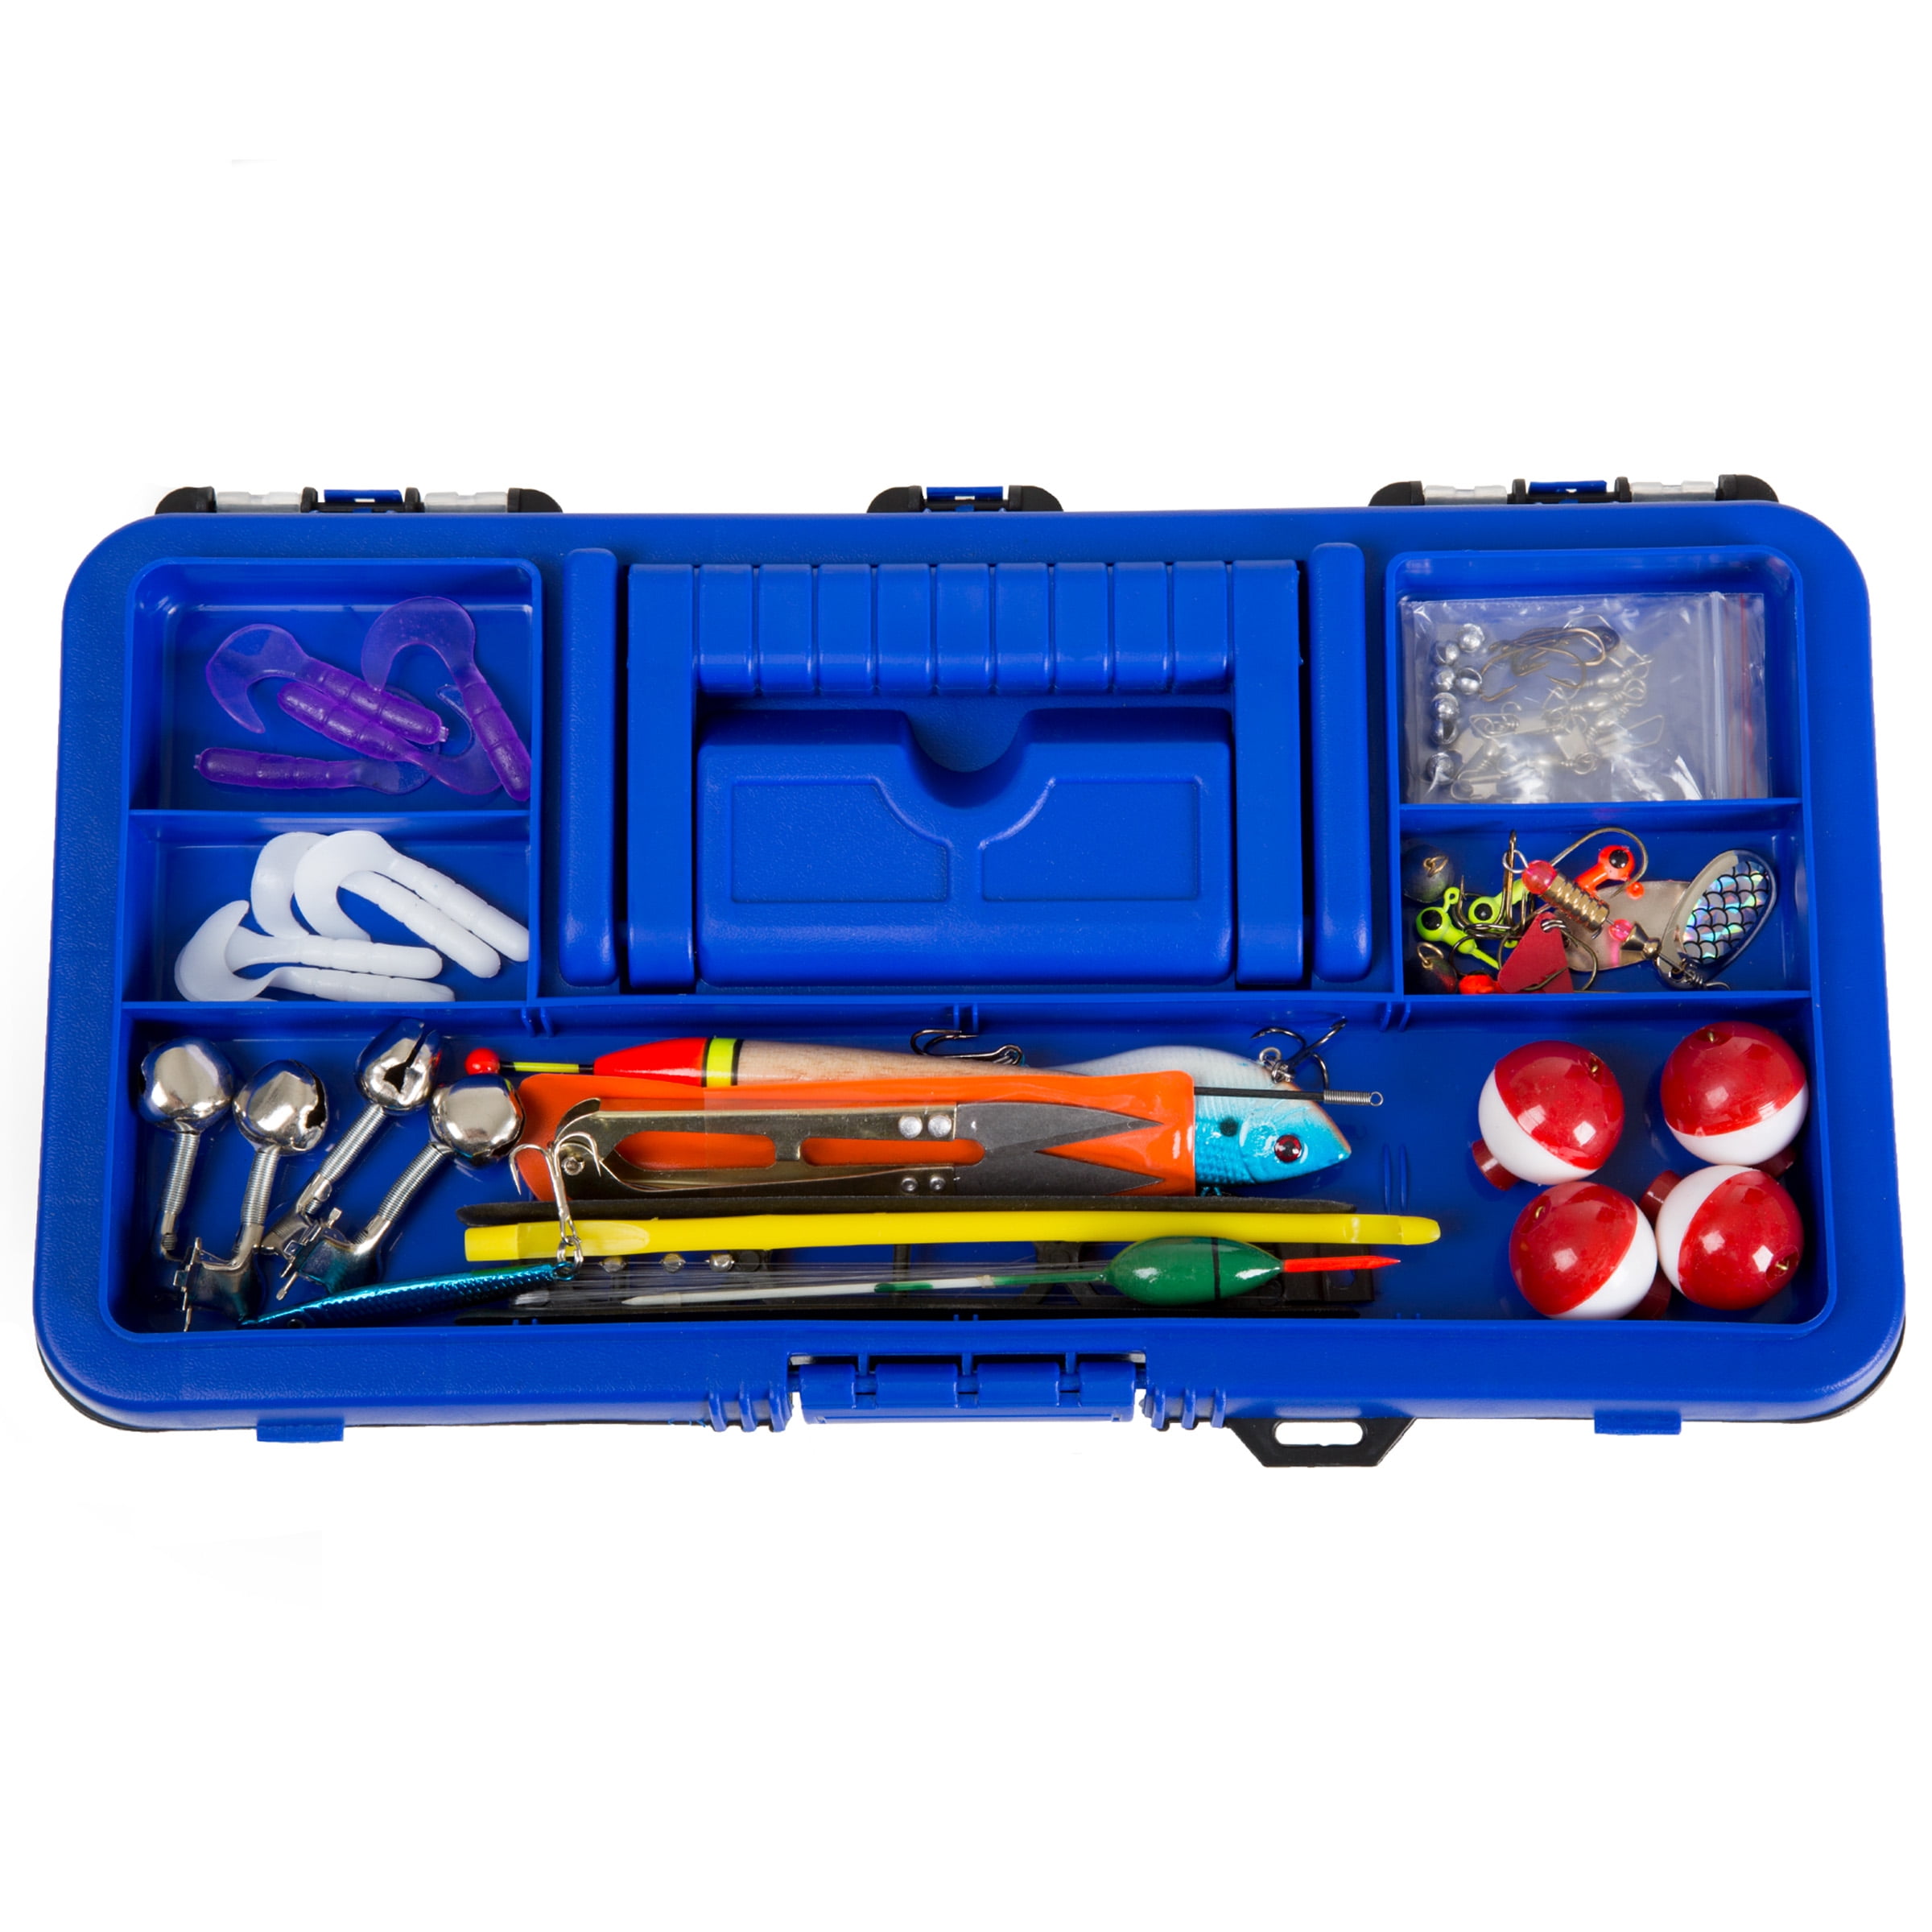 My First Tackle Box (With Fishing Rod, Lures, Hooks, Line, and More!): Buy  My First Tackle Box (With Fishing Rod, Lures, Hooks, Line, and More!) by B.